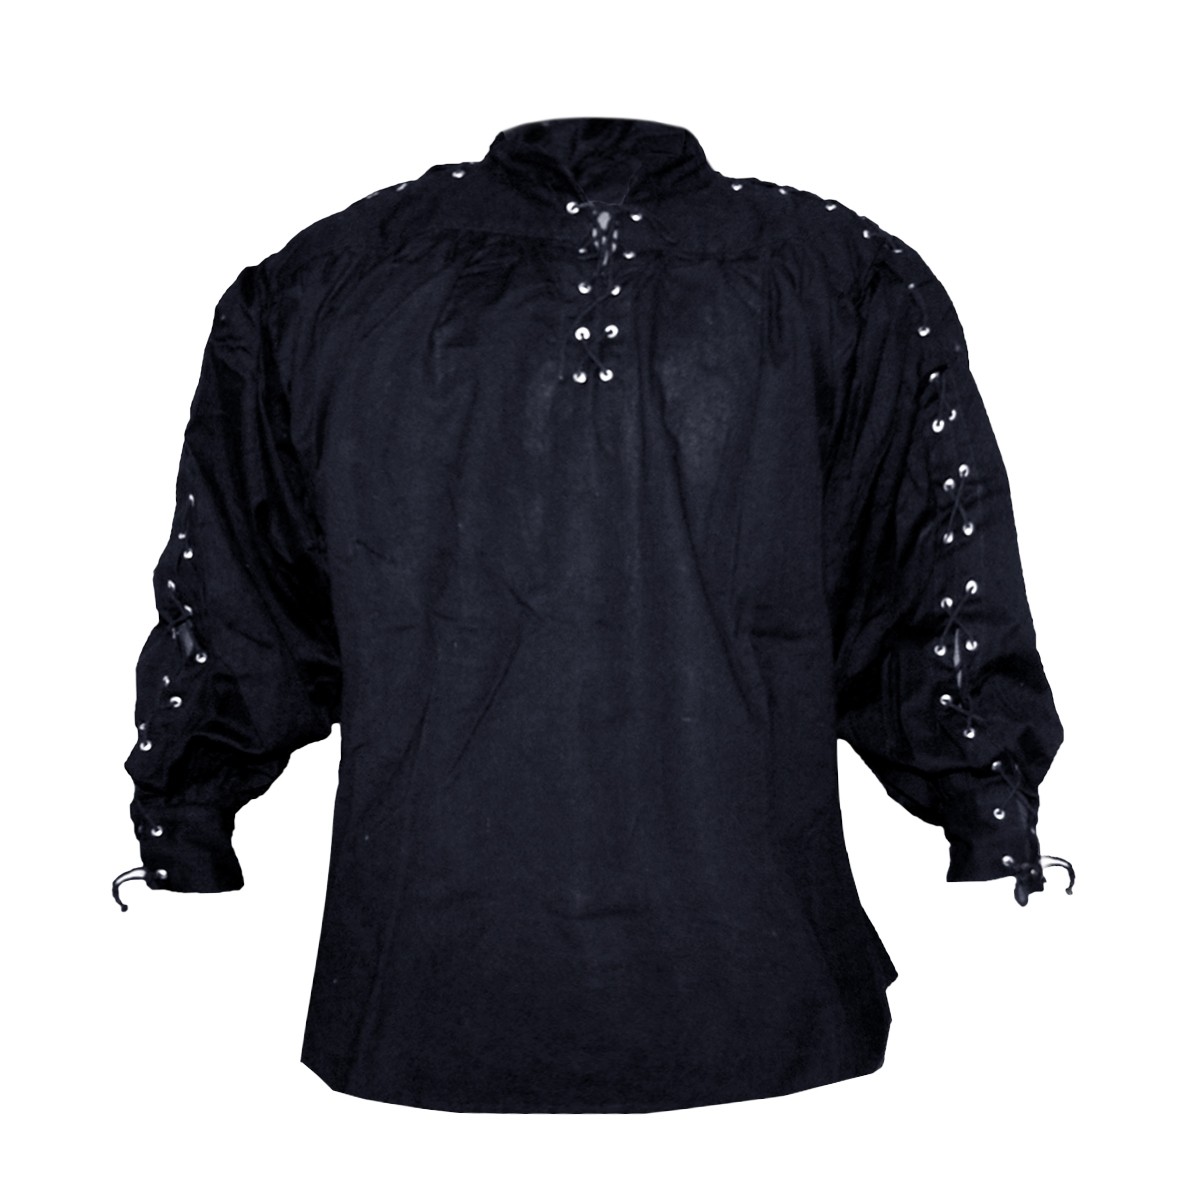 Cotton Shirt, Collarless, Laced Neck&Sleeves, Black